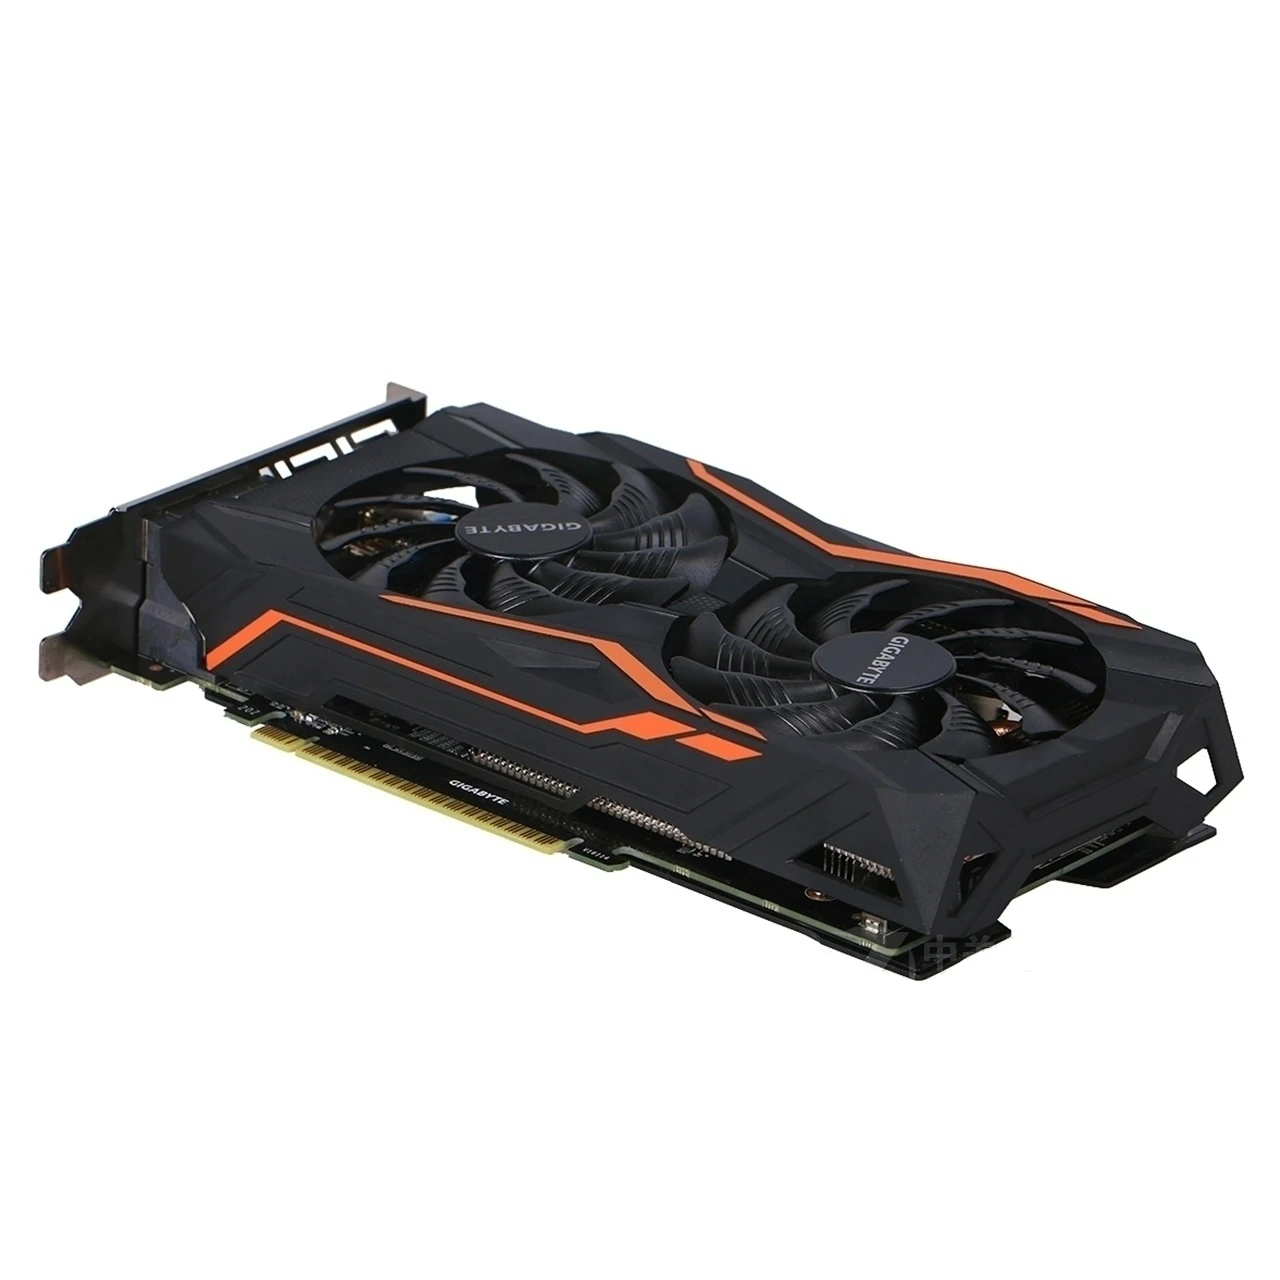 

2021 Cheap price second hand used GTX 1050 Ti G1 Gaming 4G Gddr5 Graphics card for gaming